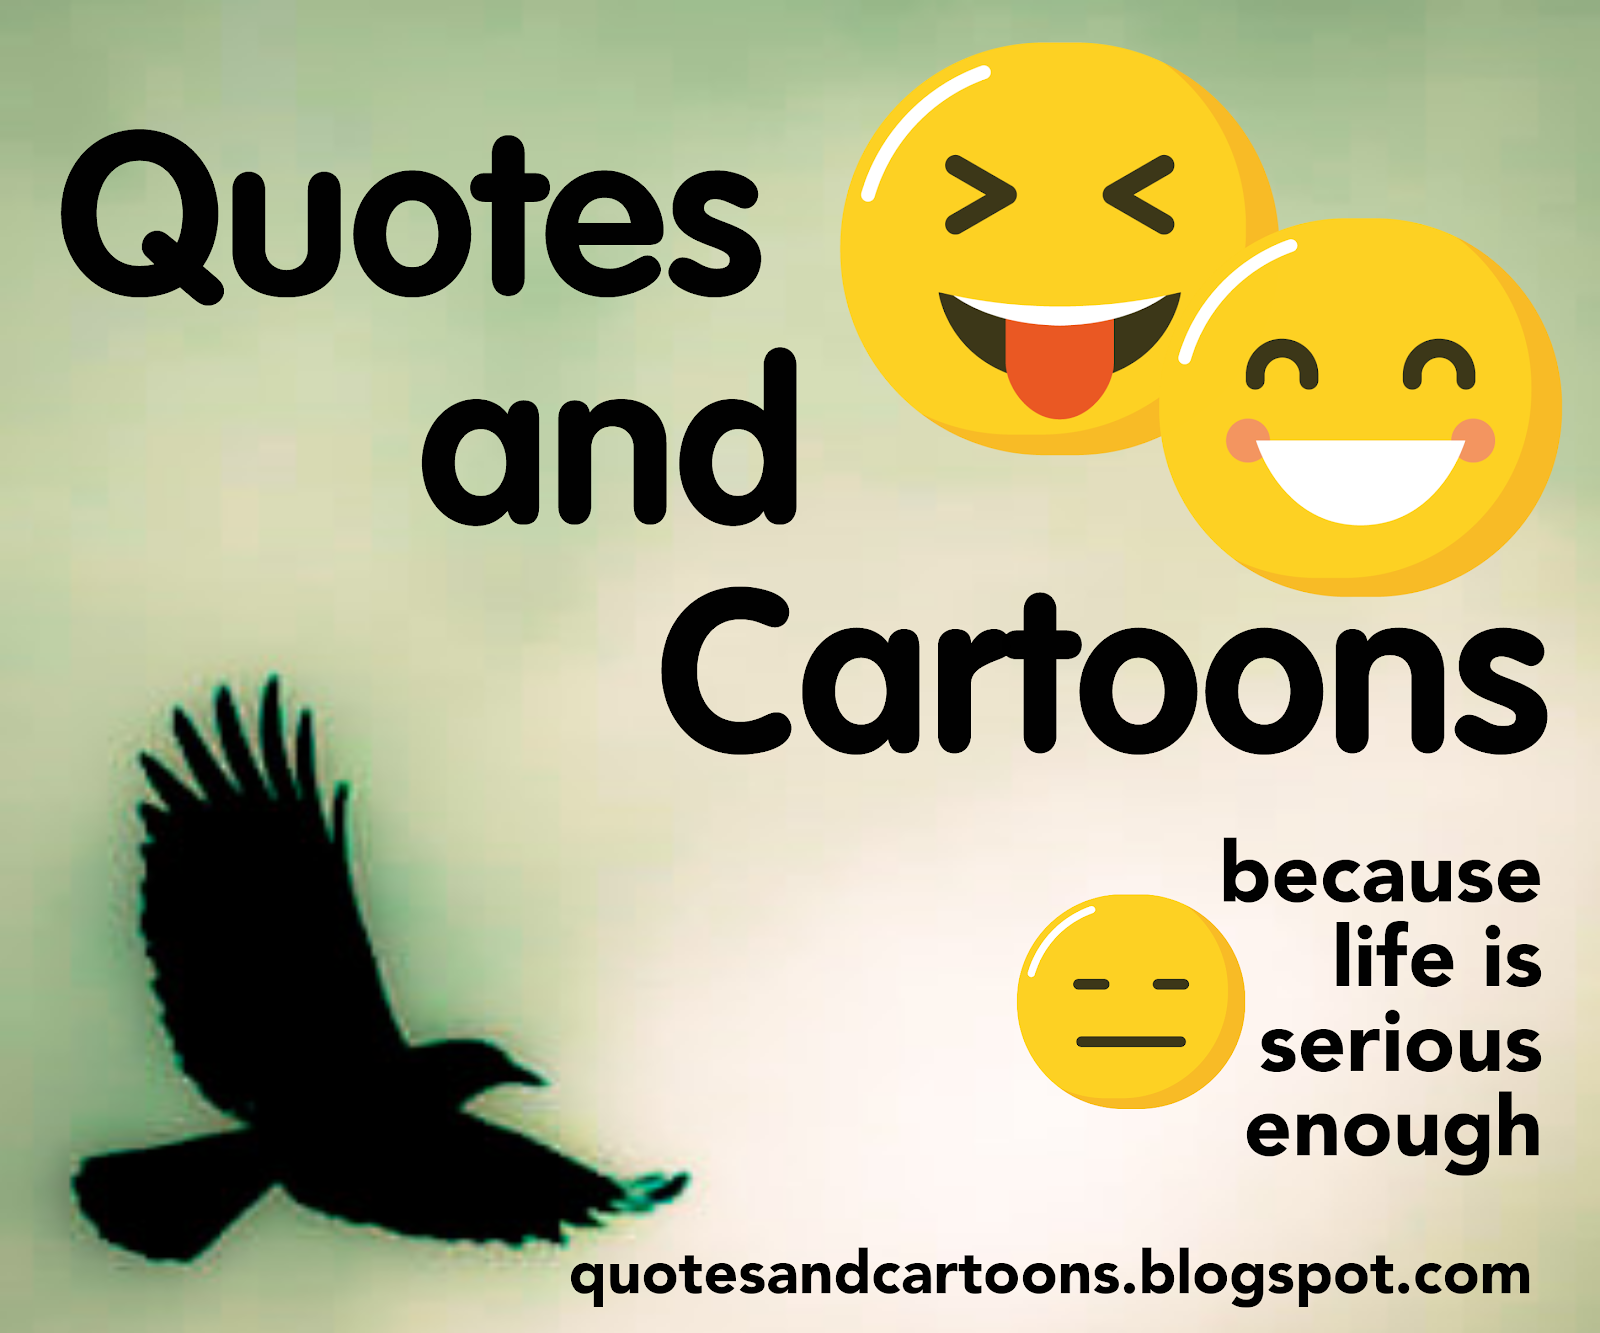 Find your Quotes and Cartons easy